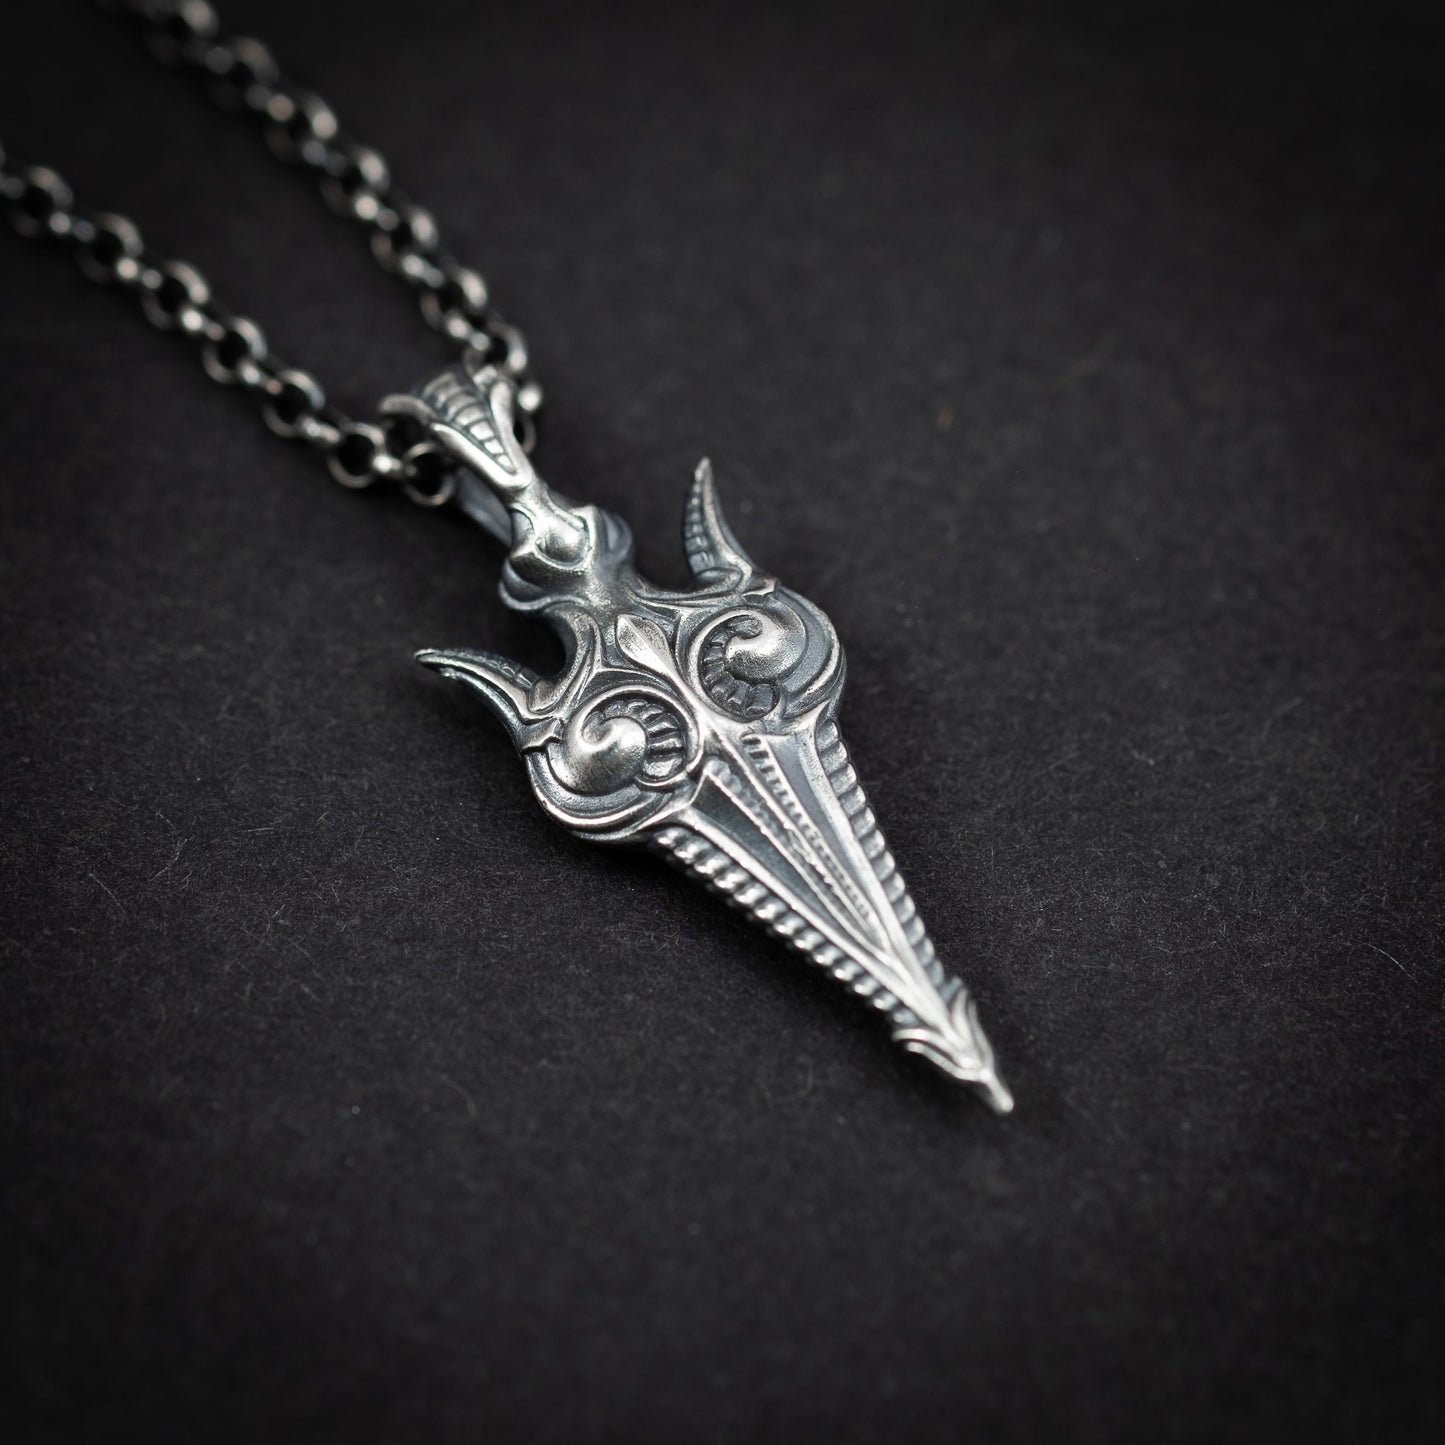 Gungnir spear Silver Viking Necklace, Warrior mens necklace, Norse Mythology, Strength pendant necklace, Handmade jewelry,